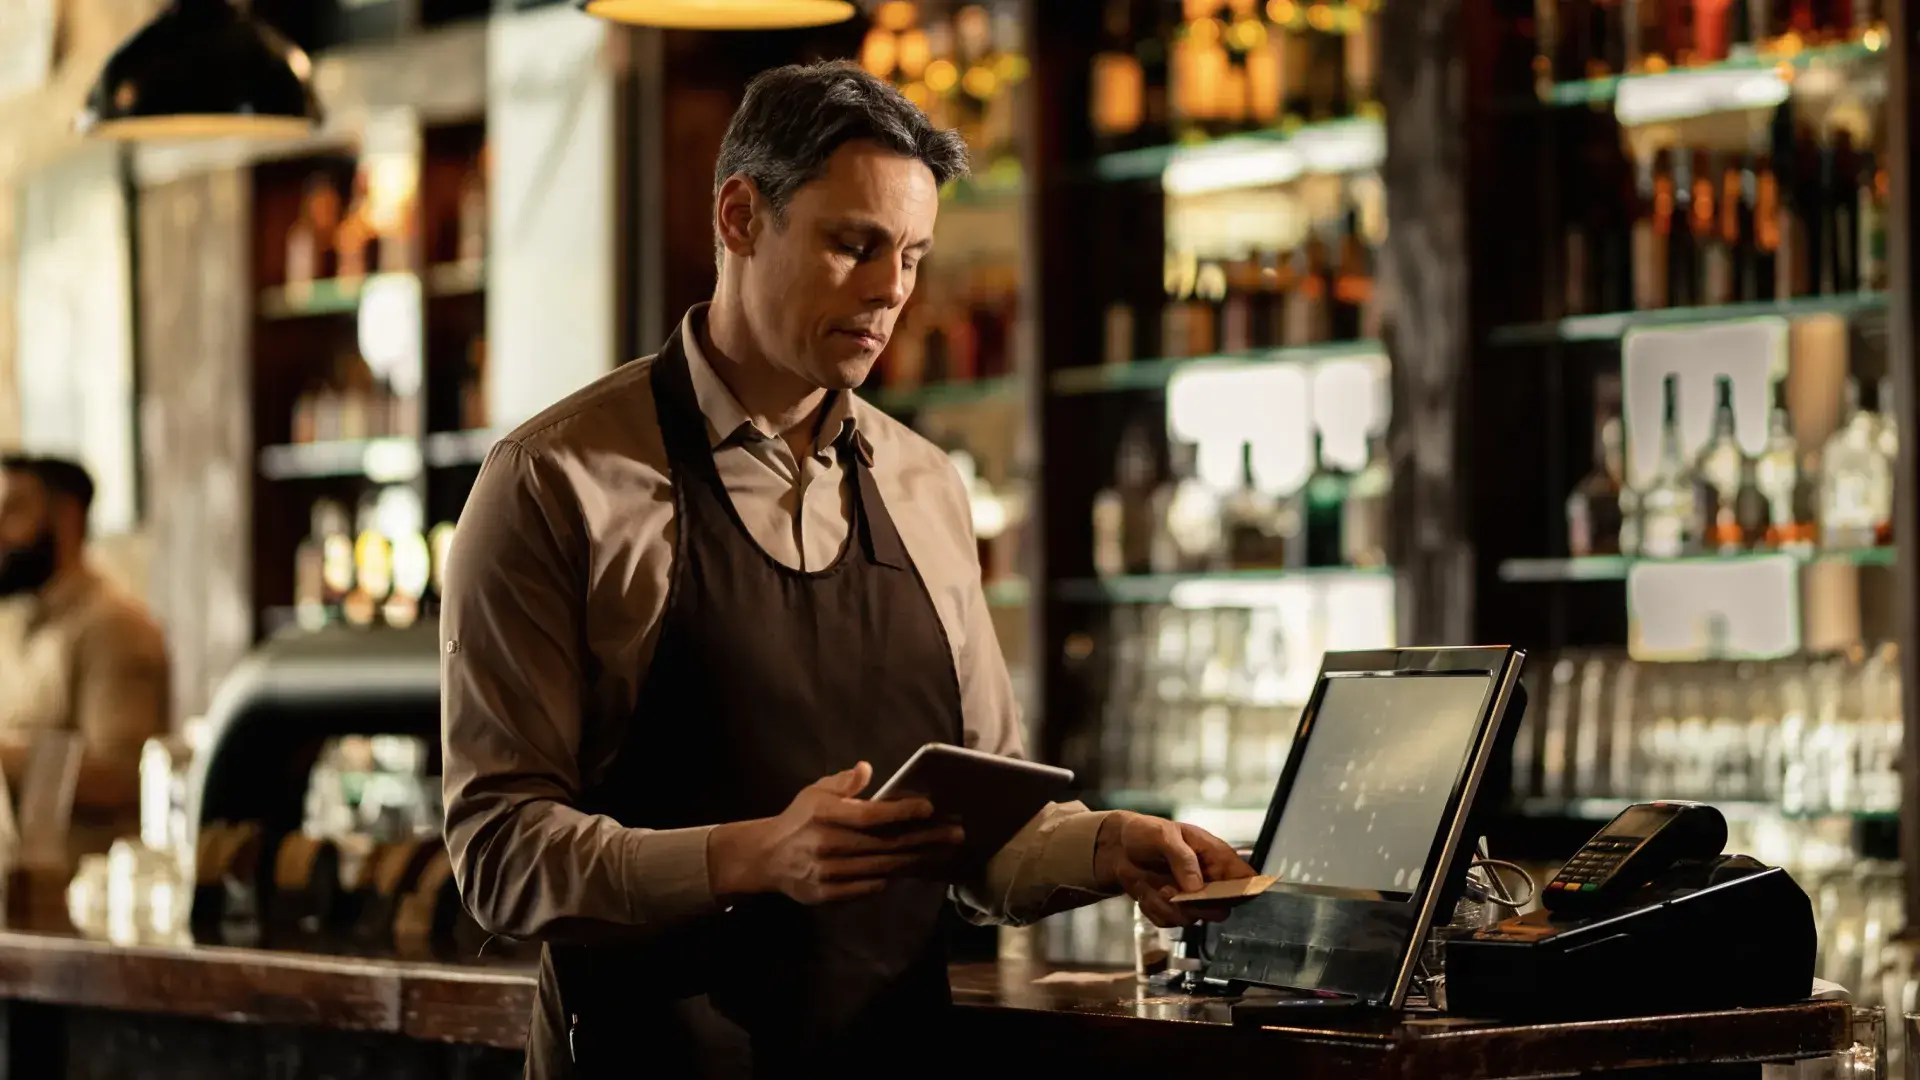 Waiter cashes up at an RKSV-compliant POS with SIGN AT from fiskaly.